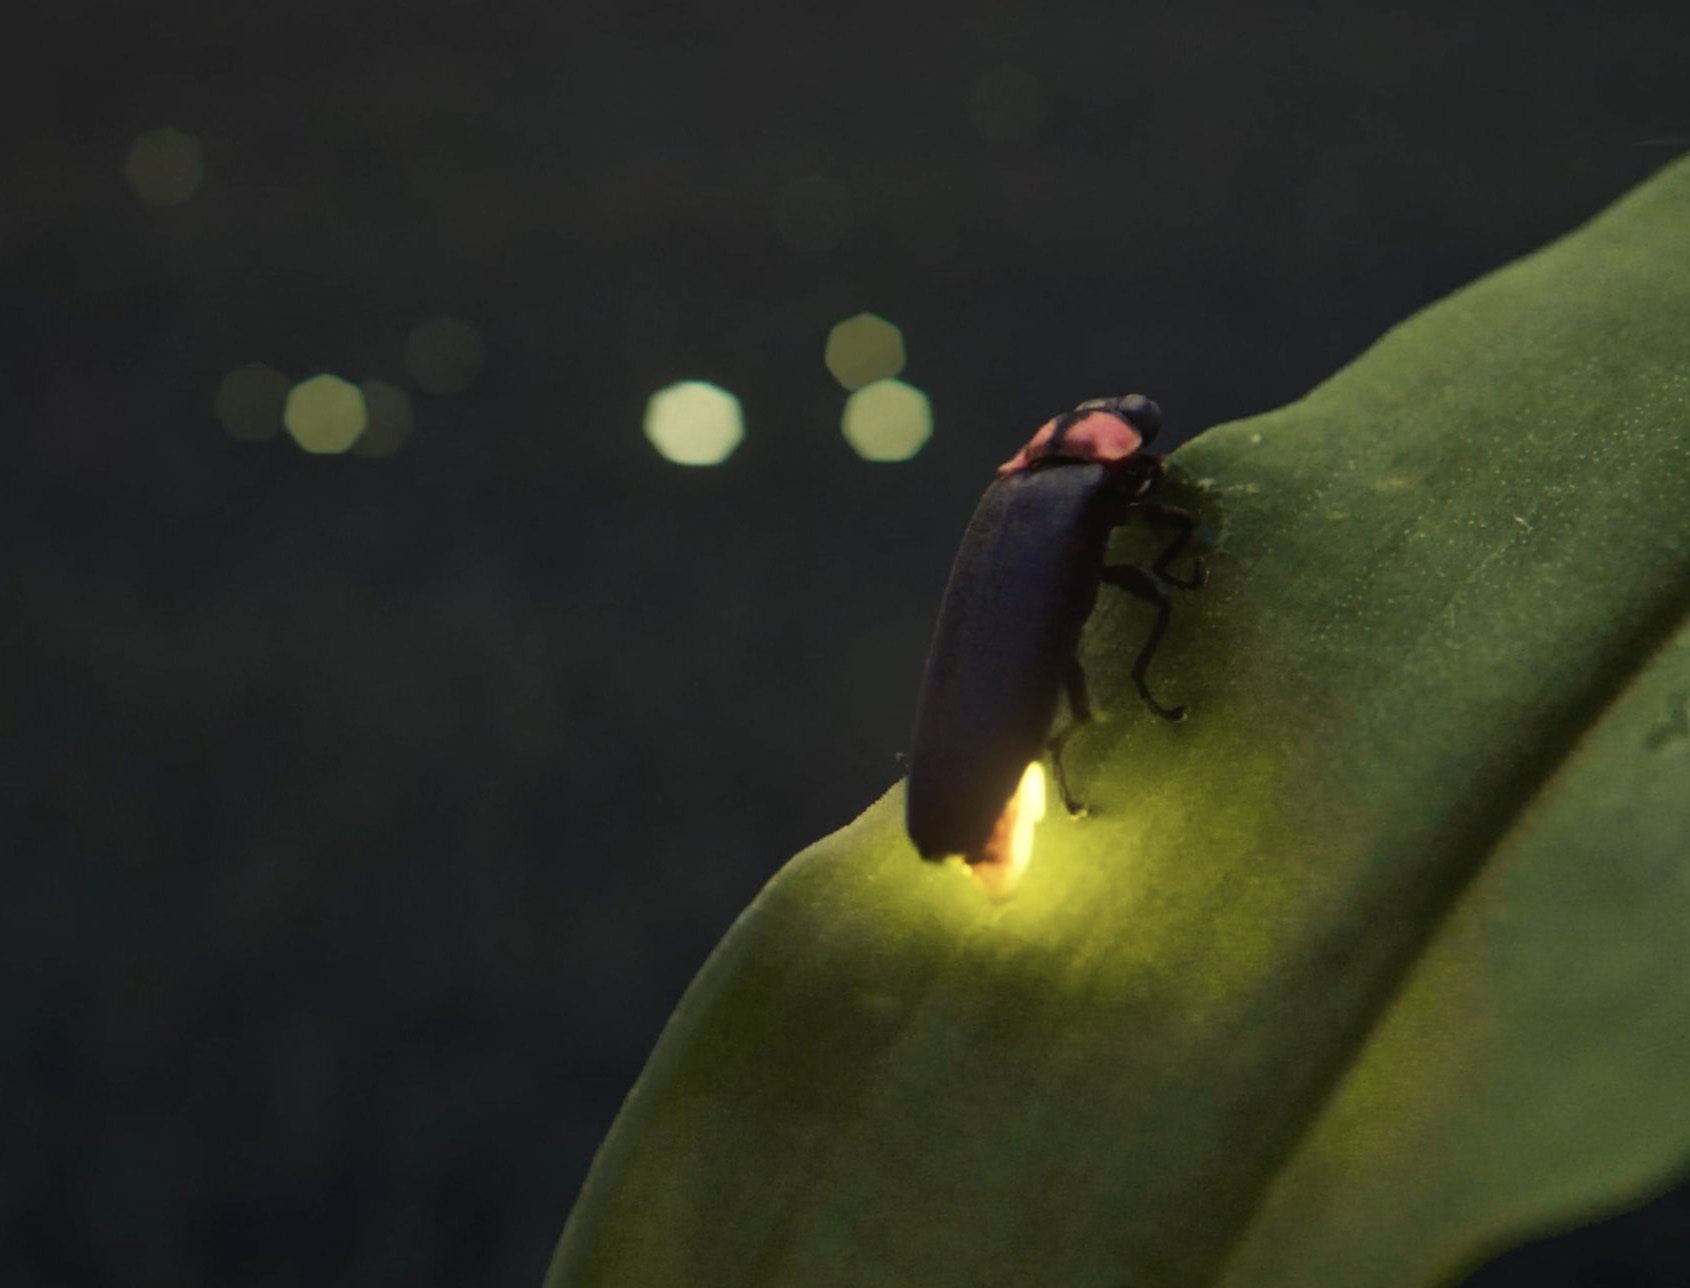 This image shows a firefly giving light on a green leaf